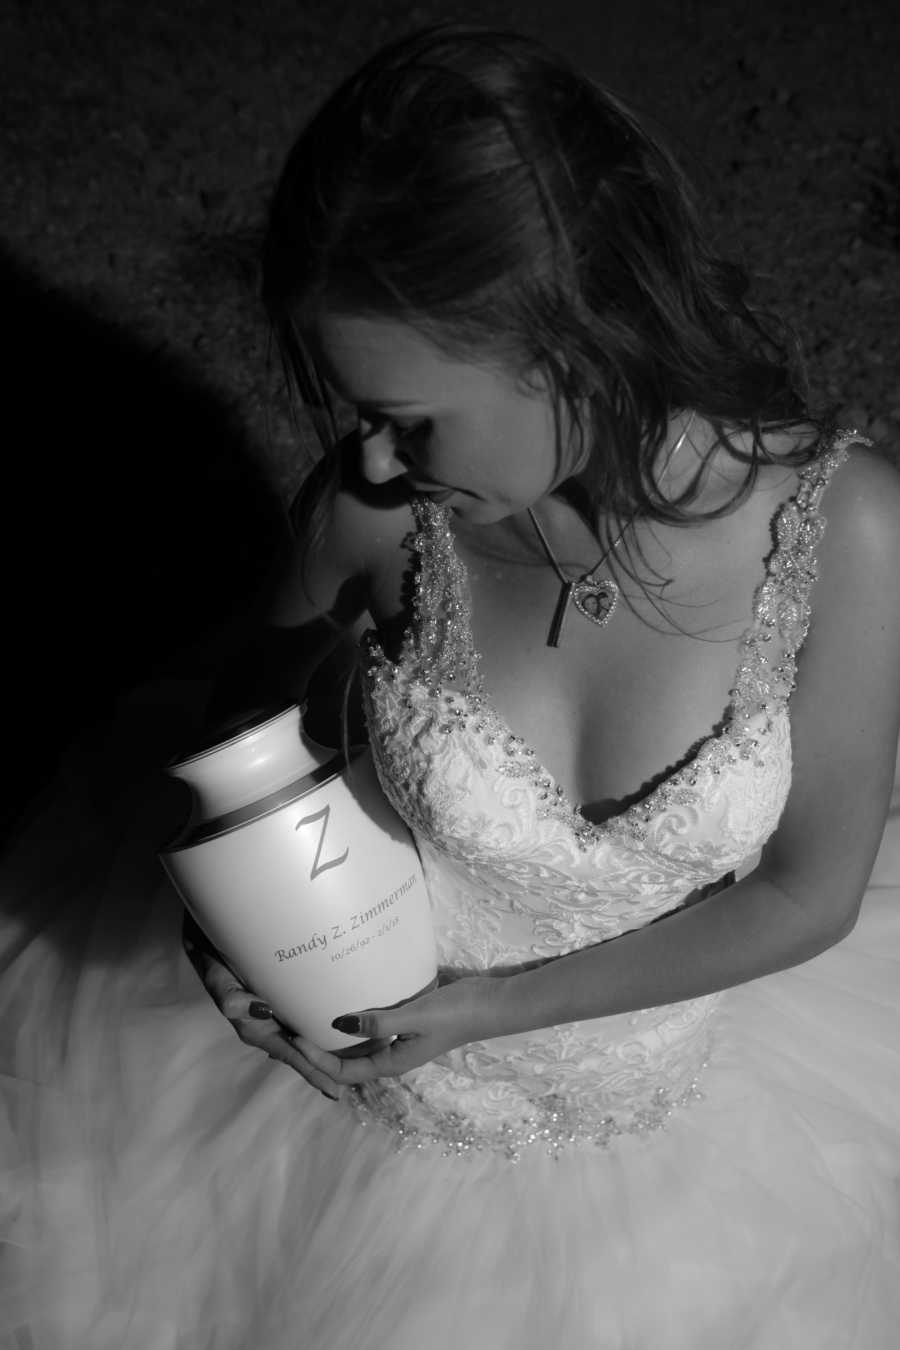 Woman in wedding gown sits holding urn of late fiancee's ashes